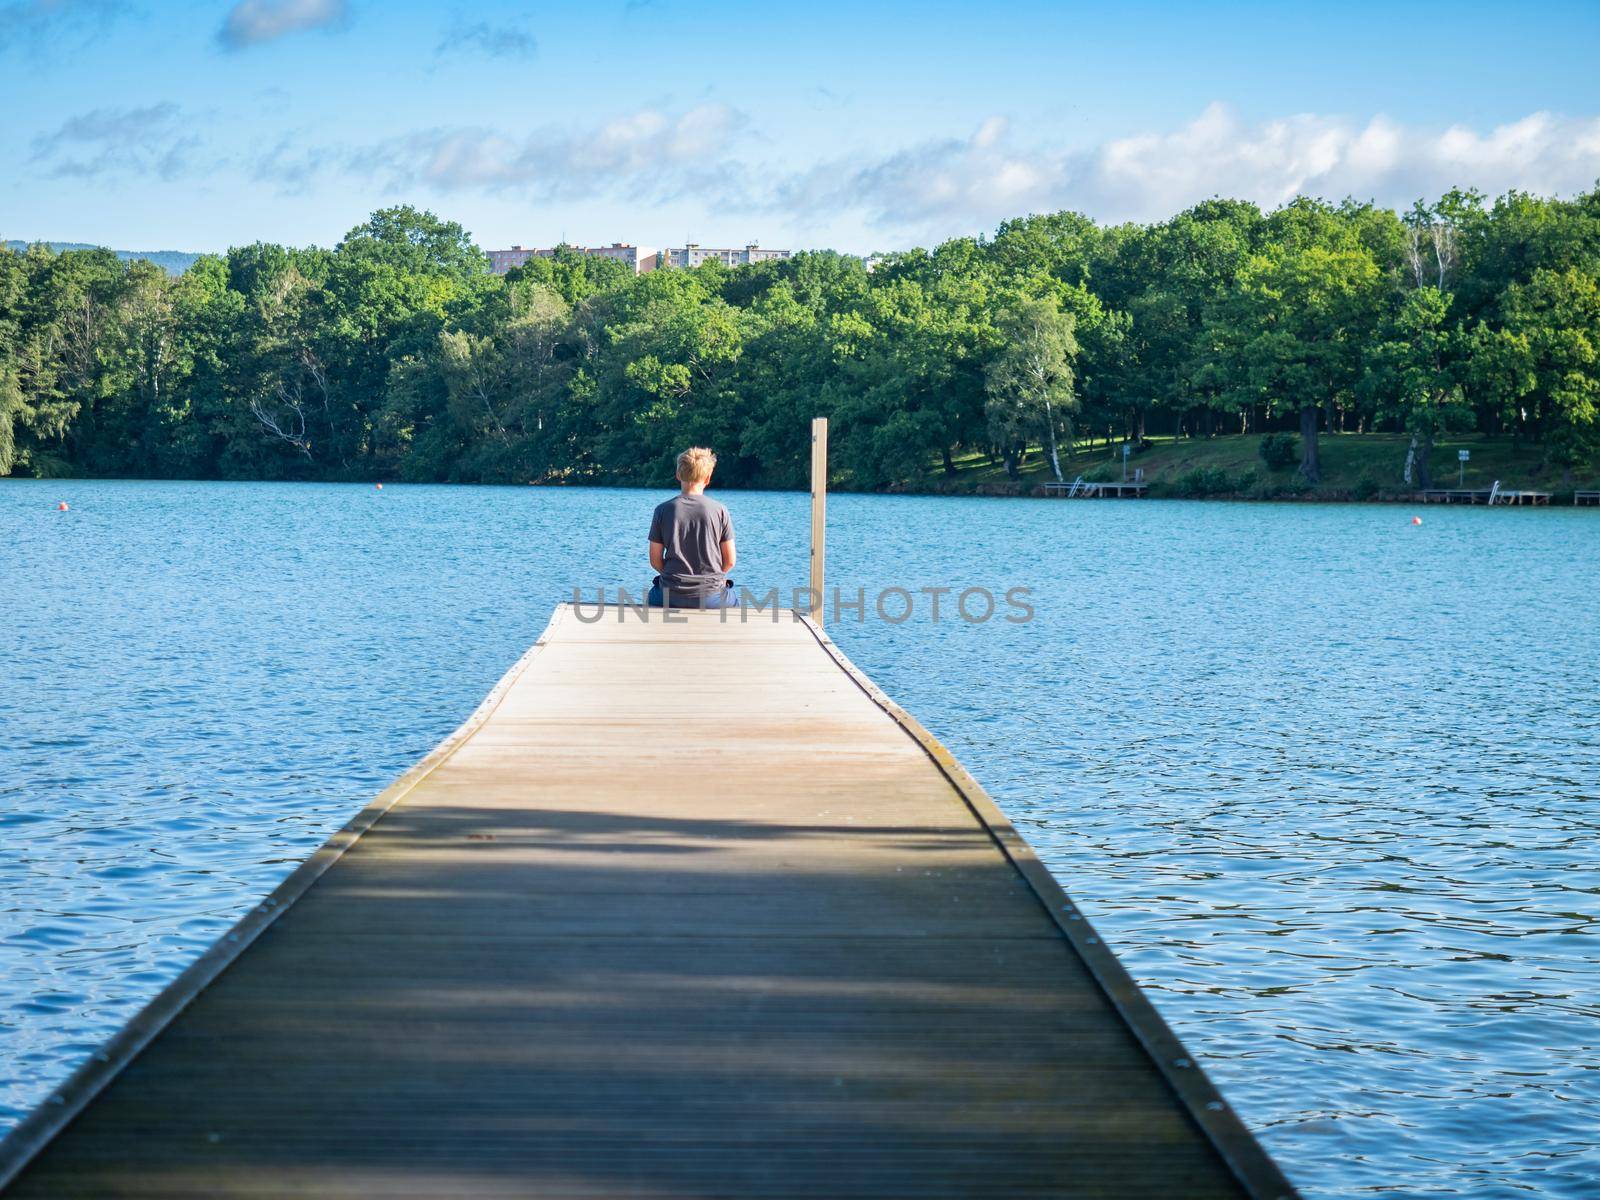 Blond hair boy sits on the lake mole and looks at the water by rdonar2